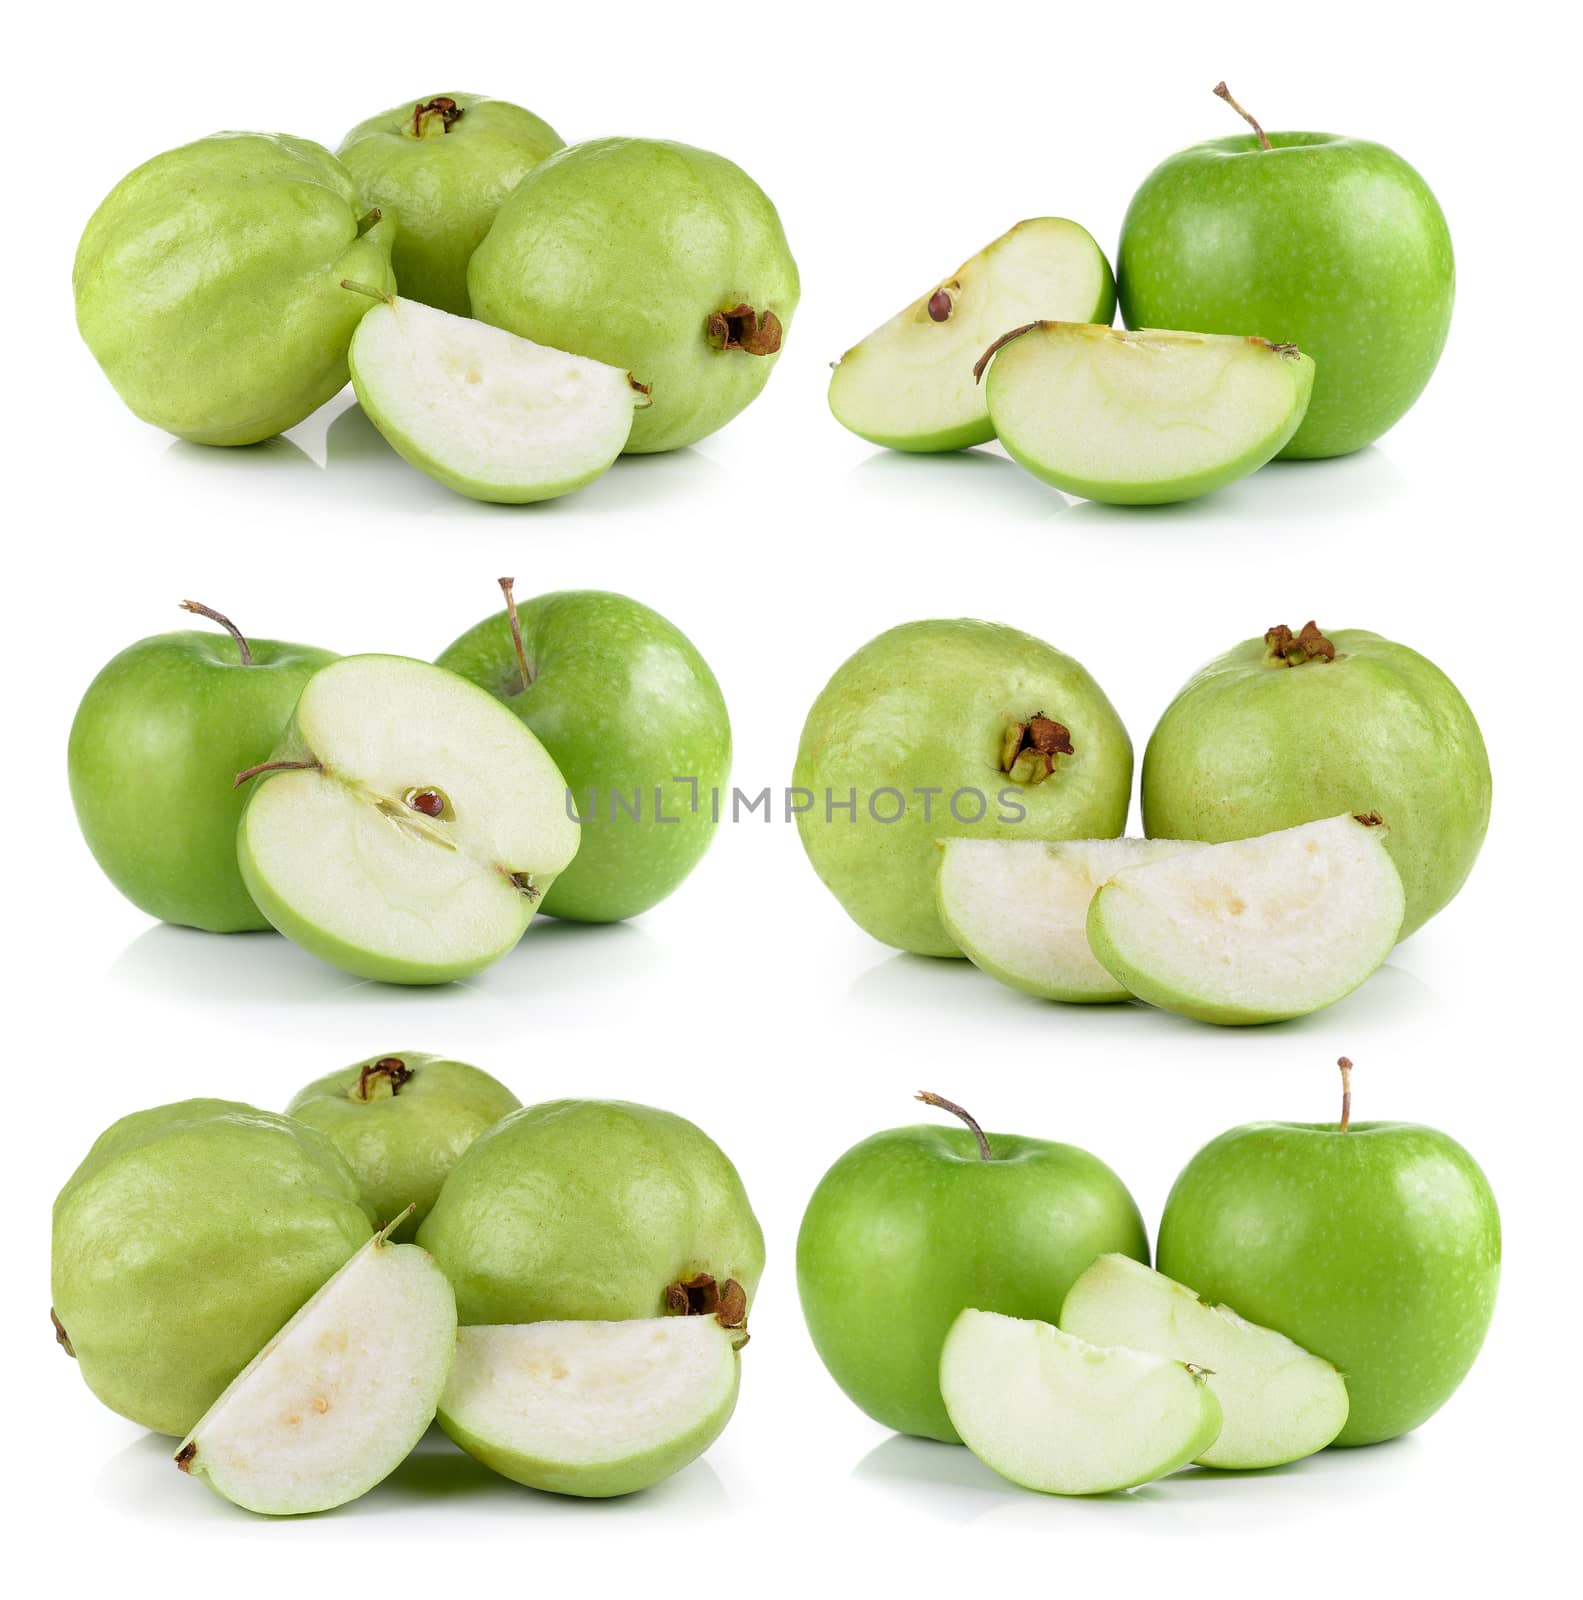 guava fruit and apple isolated on white background